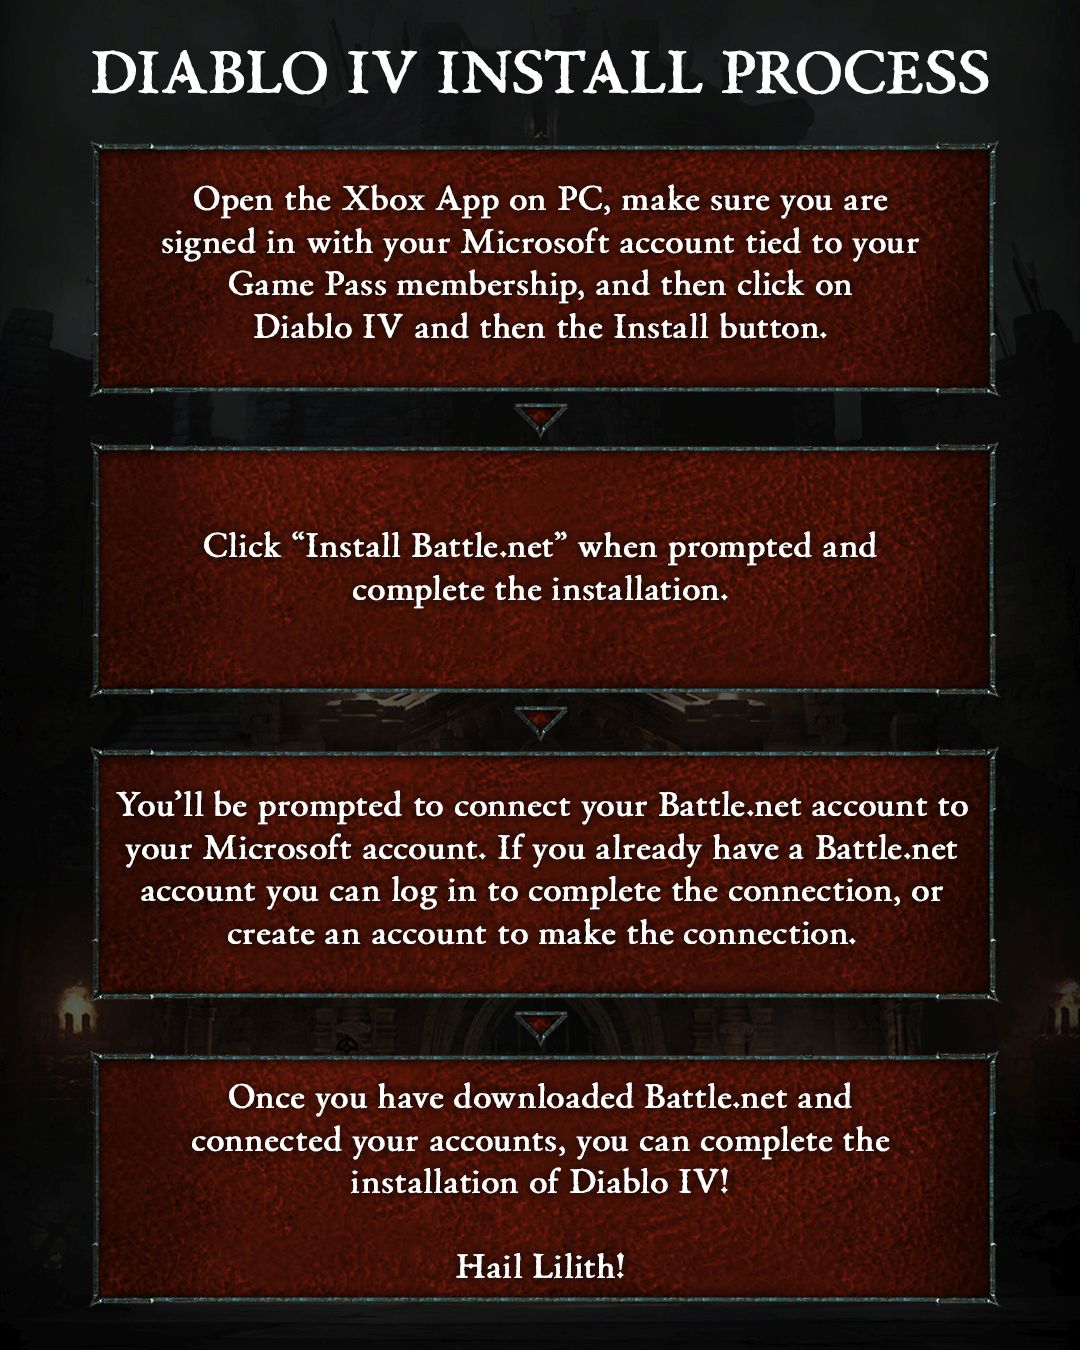 Xbox has shared a detailed step-by-step guide for players to help them install Diablo 4 through Game Pass.